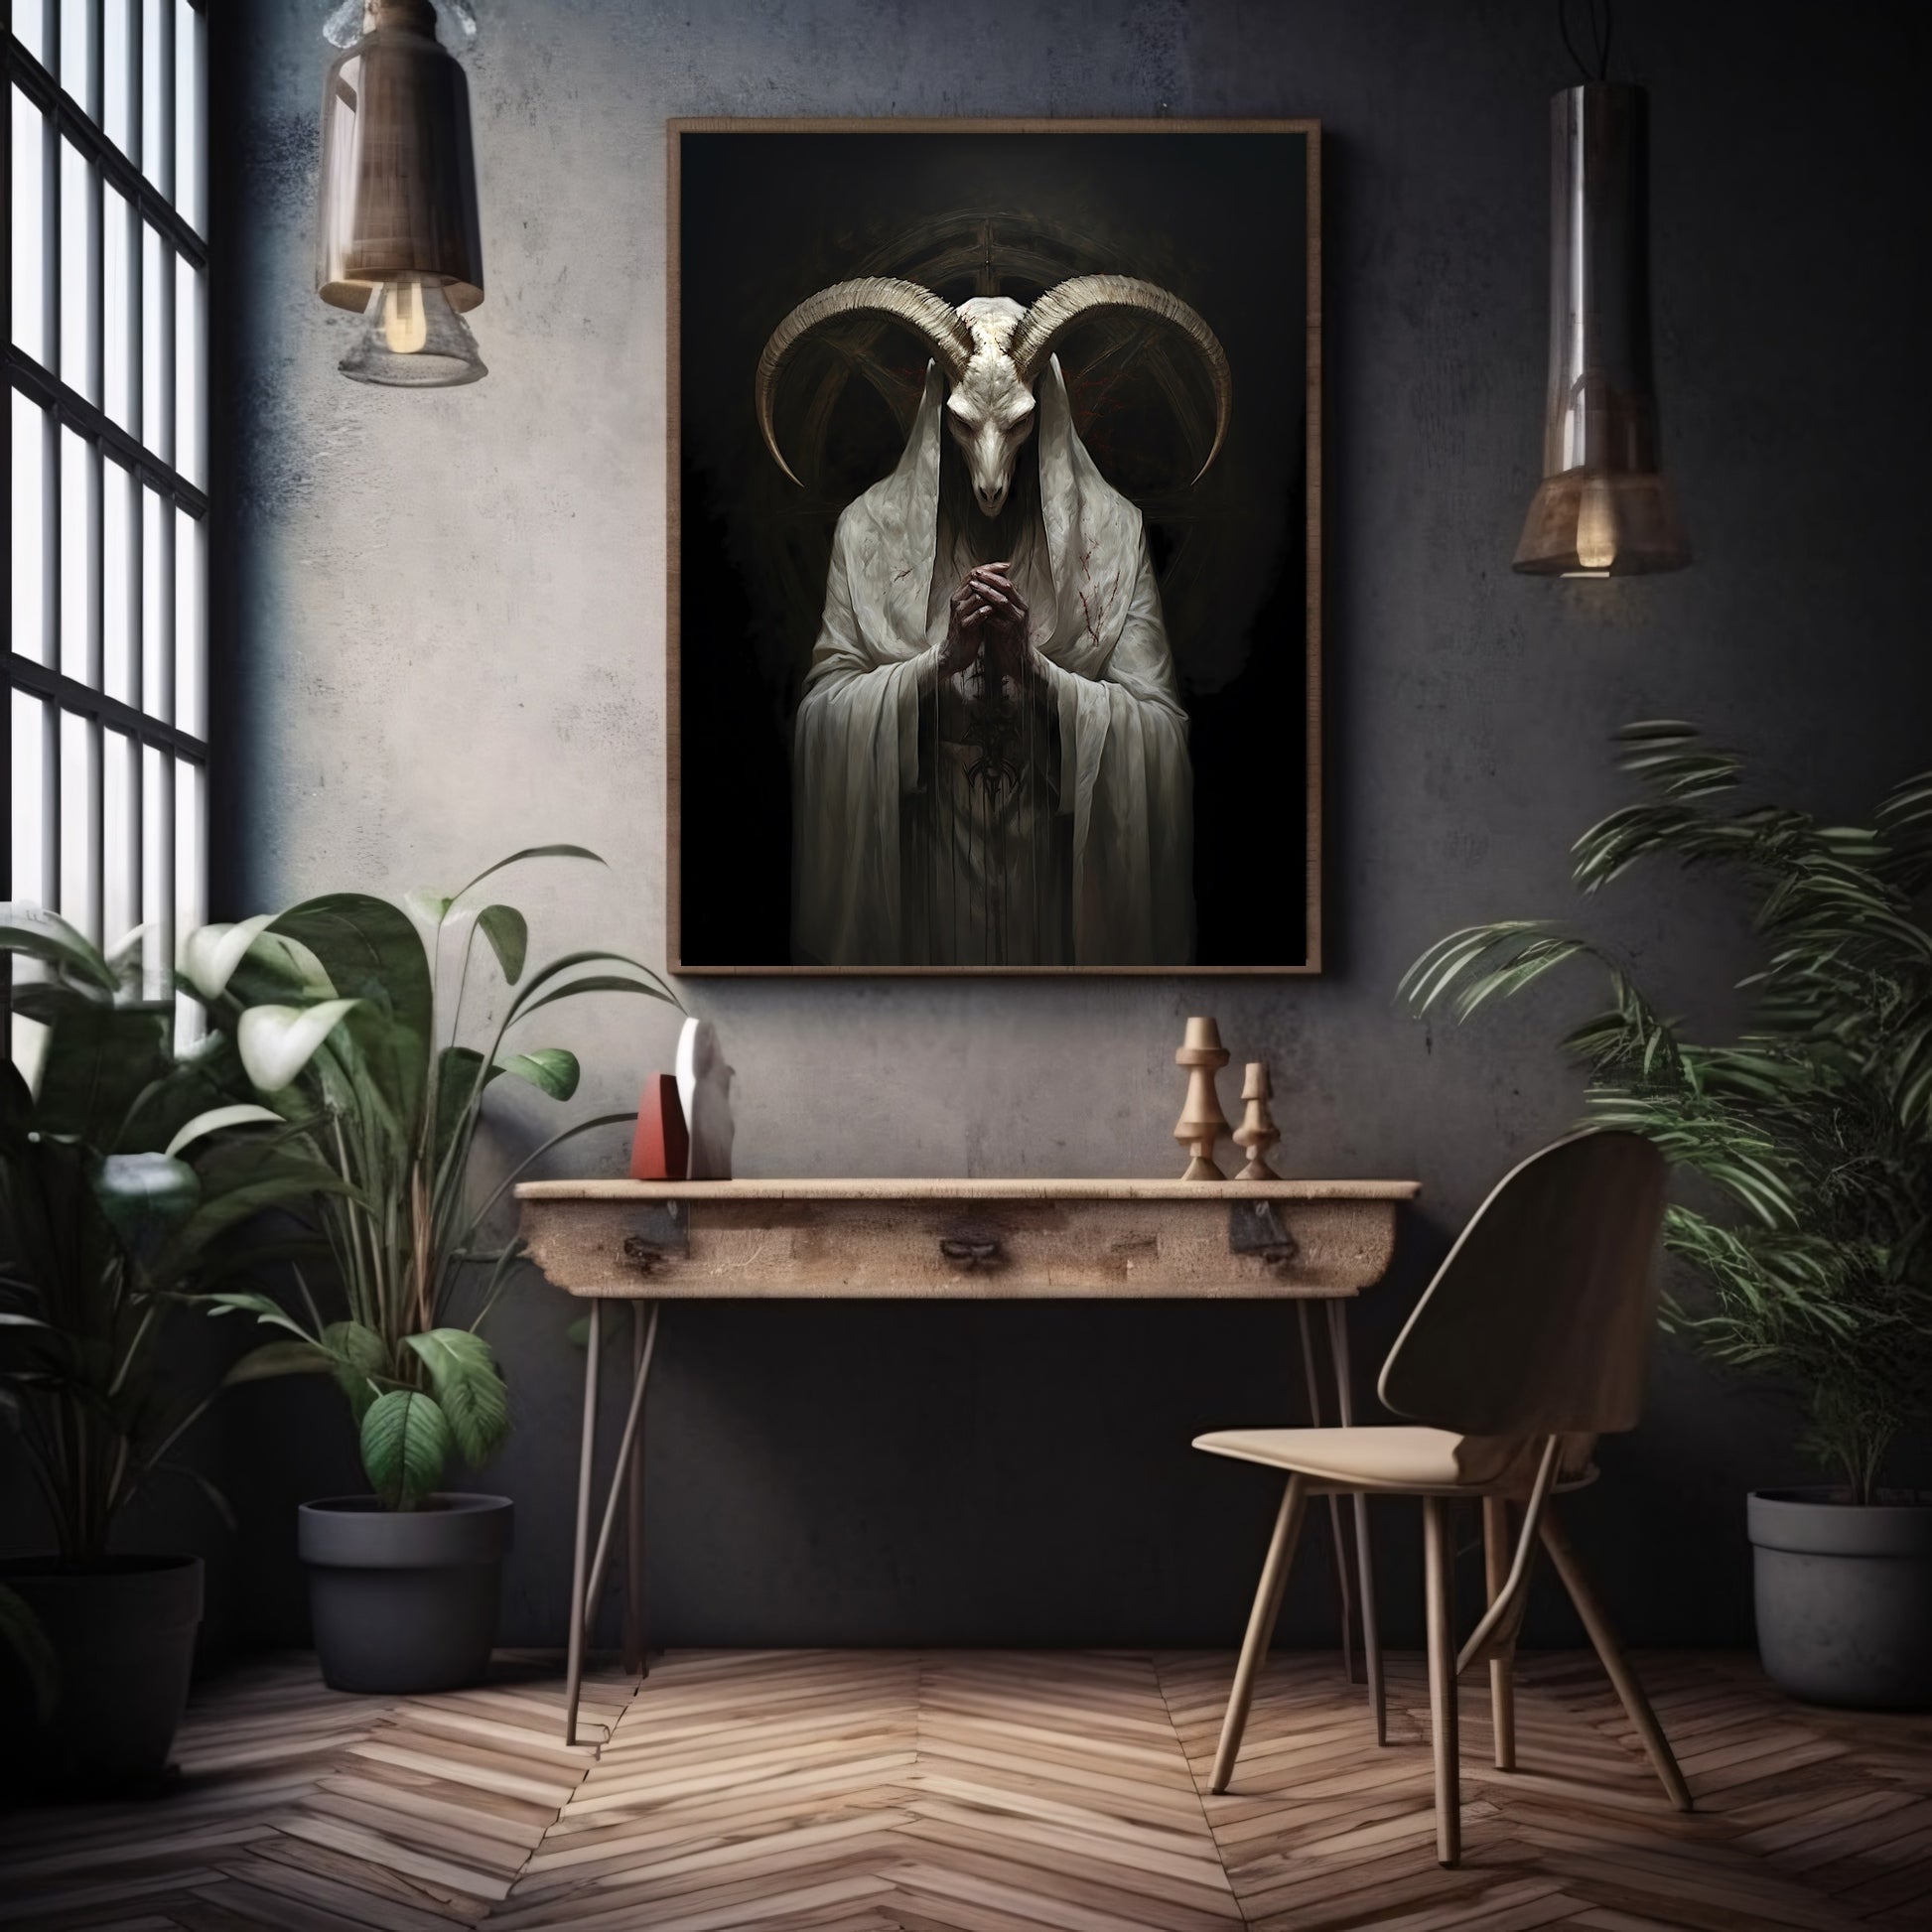 Cult of Baphomet Wall Art Occult Esoteric Artwork Witchcraft Altar